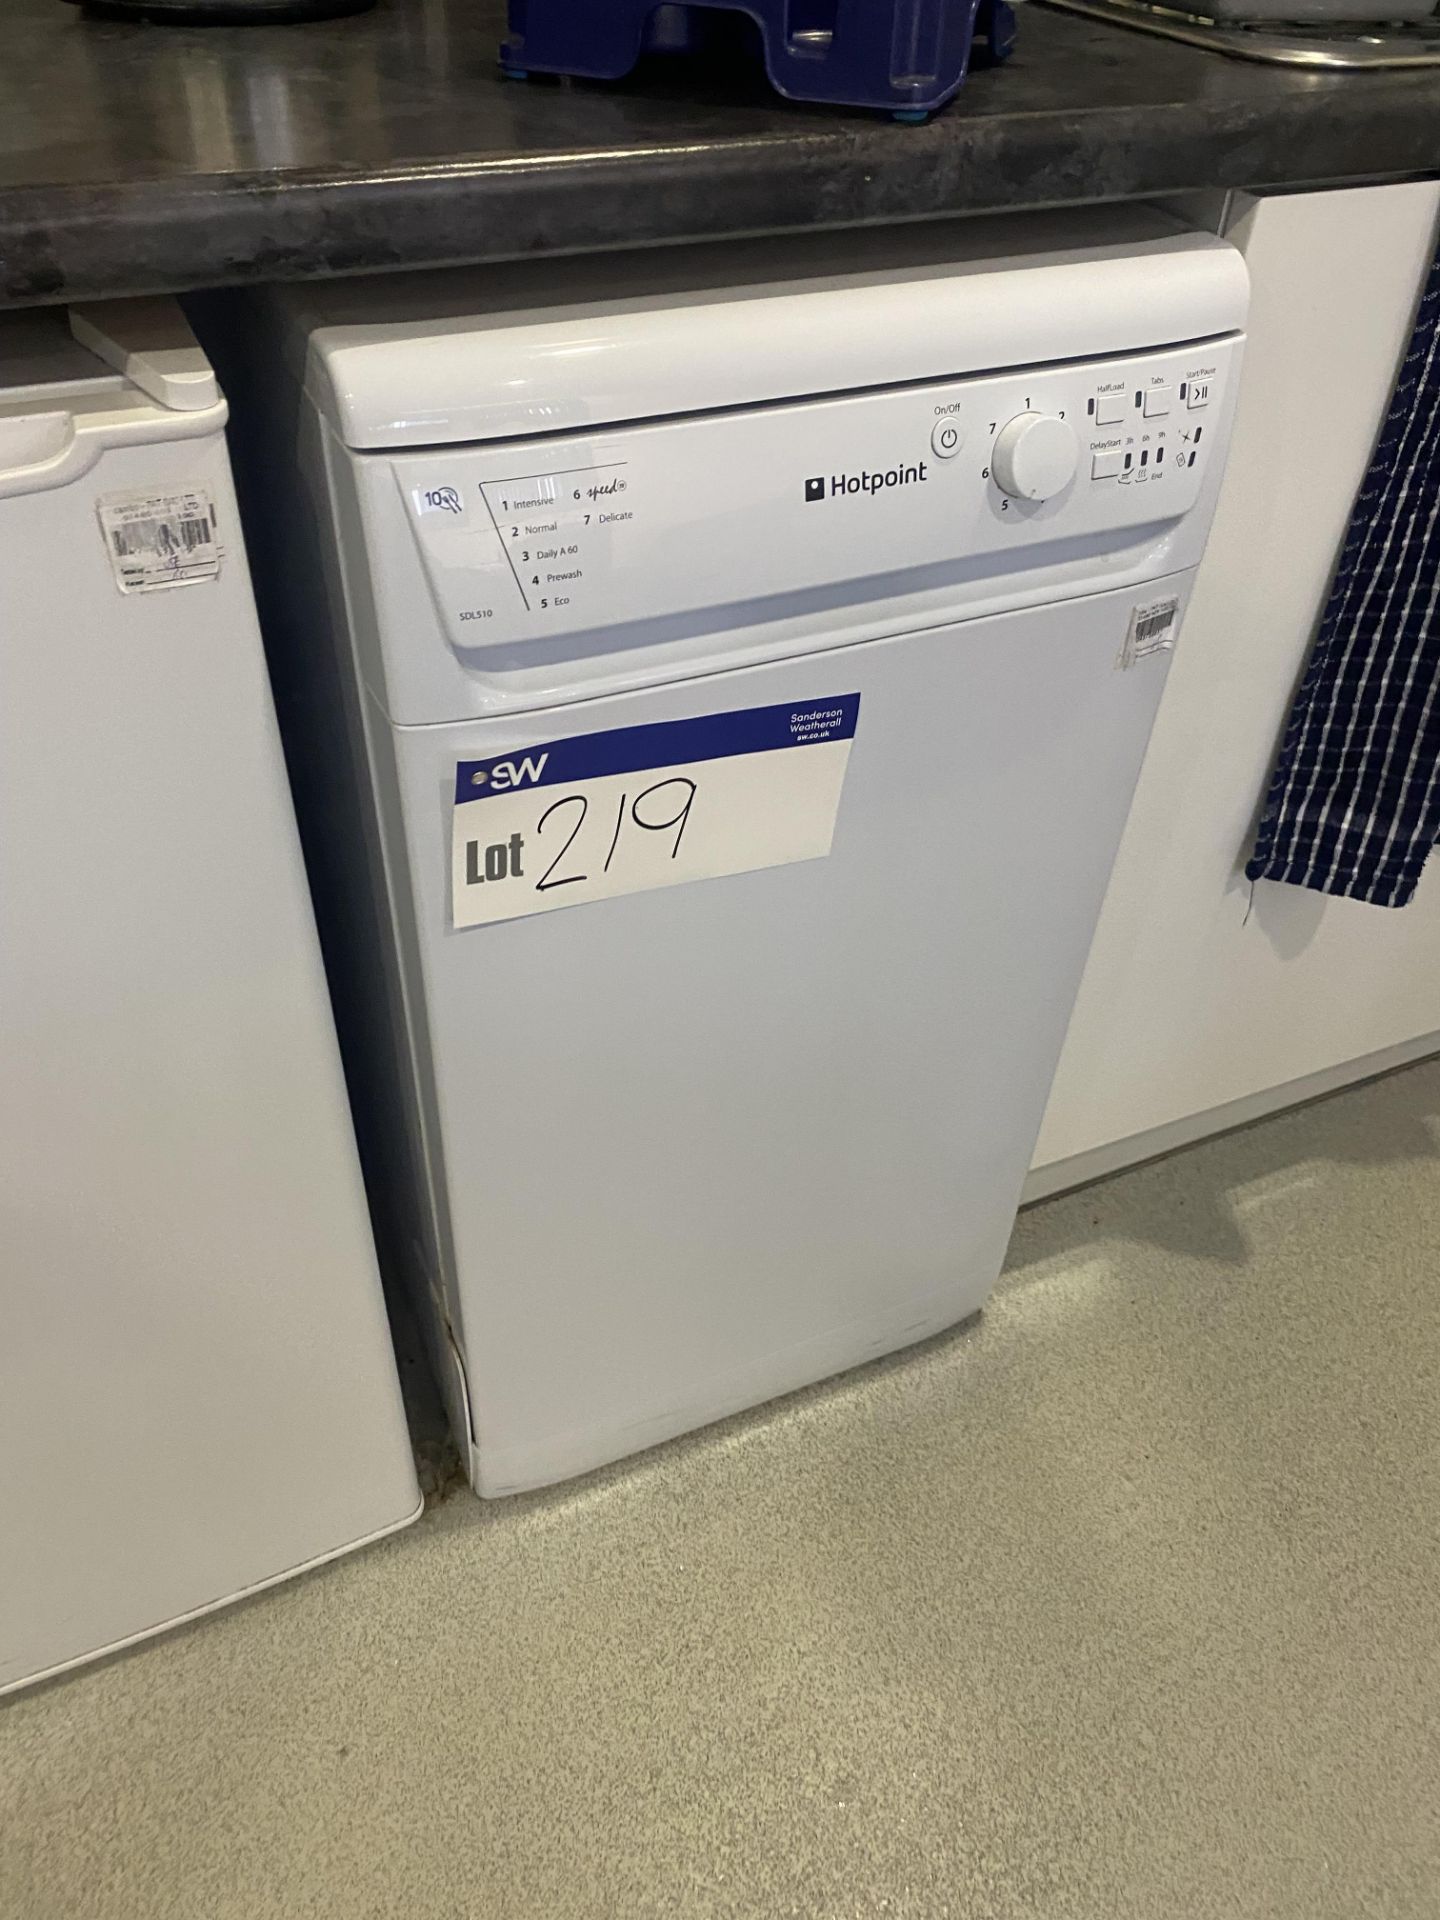 Hotpoint SDL510 DishwasherPlease read the following important notes:- ***Overseas buyers - All